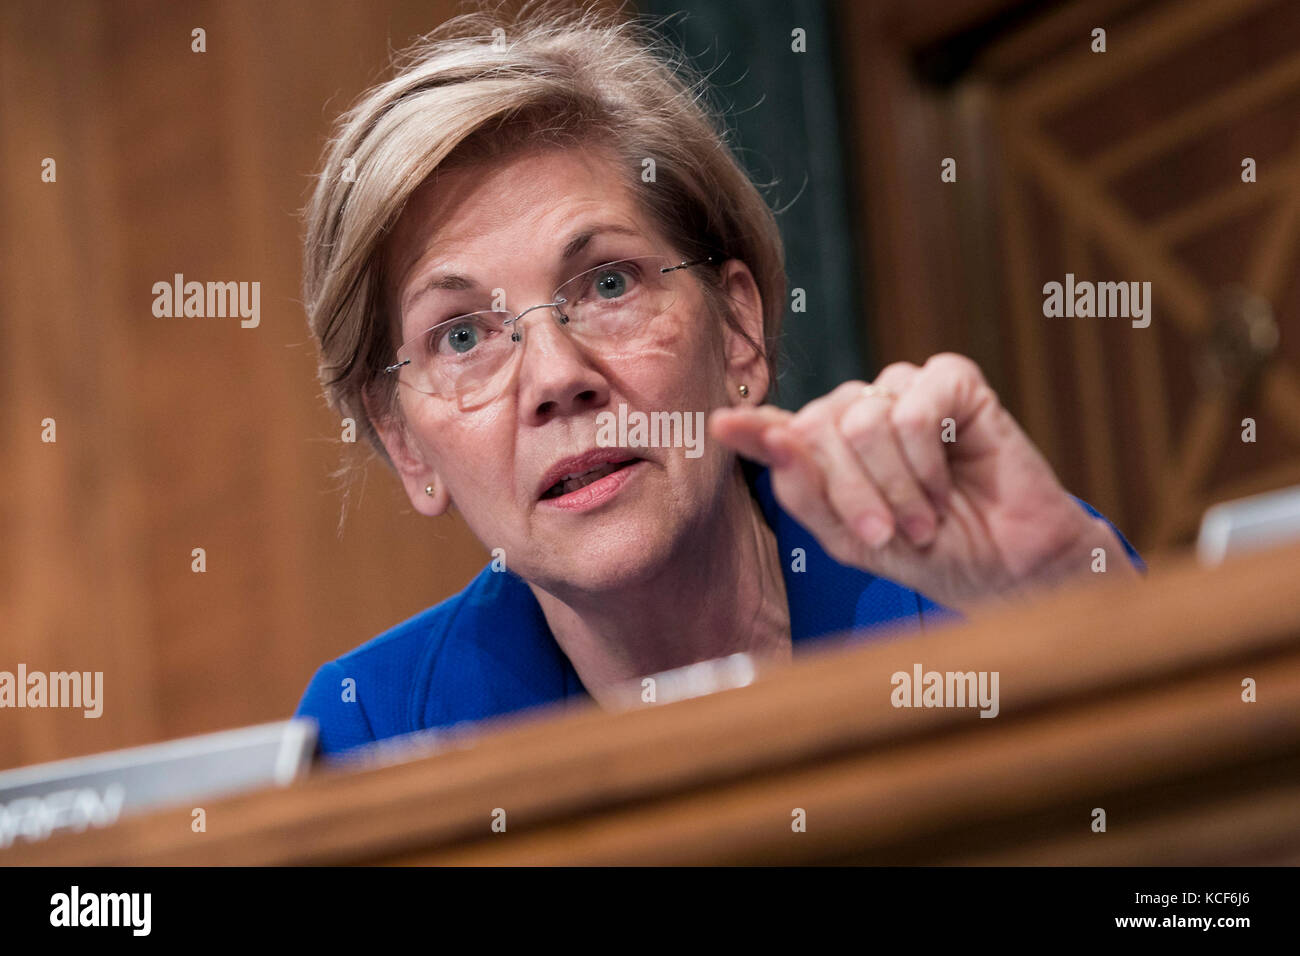 Washington DC, USA. 04th Oct, 2017. Sen. Elizabeth Warren (D-MA) questions a witness during a Senate Banking, Housing and Urban Affairs Committee hearing entitled, “An Examination of the Equifax Cybersecurity Breach,” in Washington, D.C., on October 4, 2017. The data breach is believed to have compromised the social security numbers of over 140 million Americans. Credit: Kristoffer Tripplaar/Alamy Live News Stock Photo